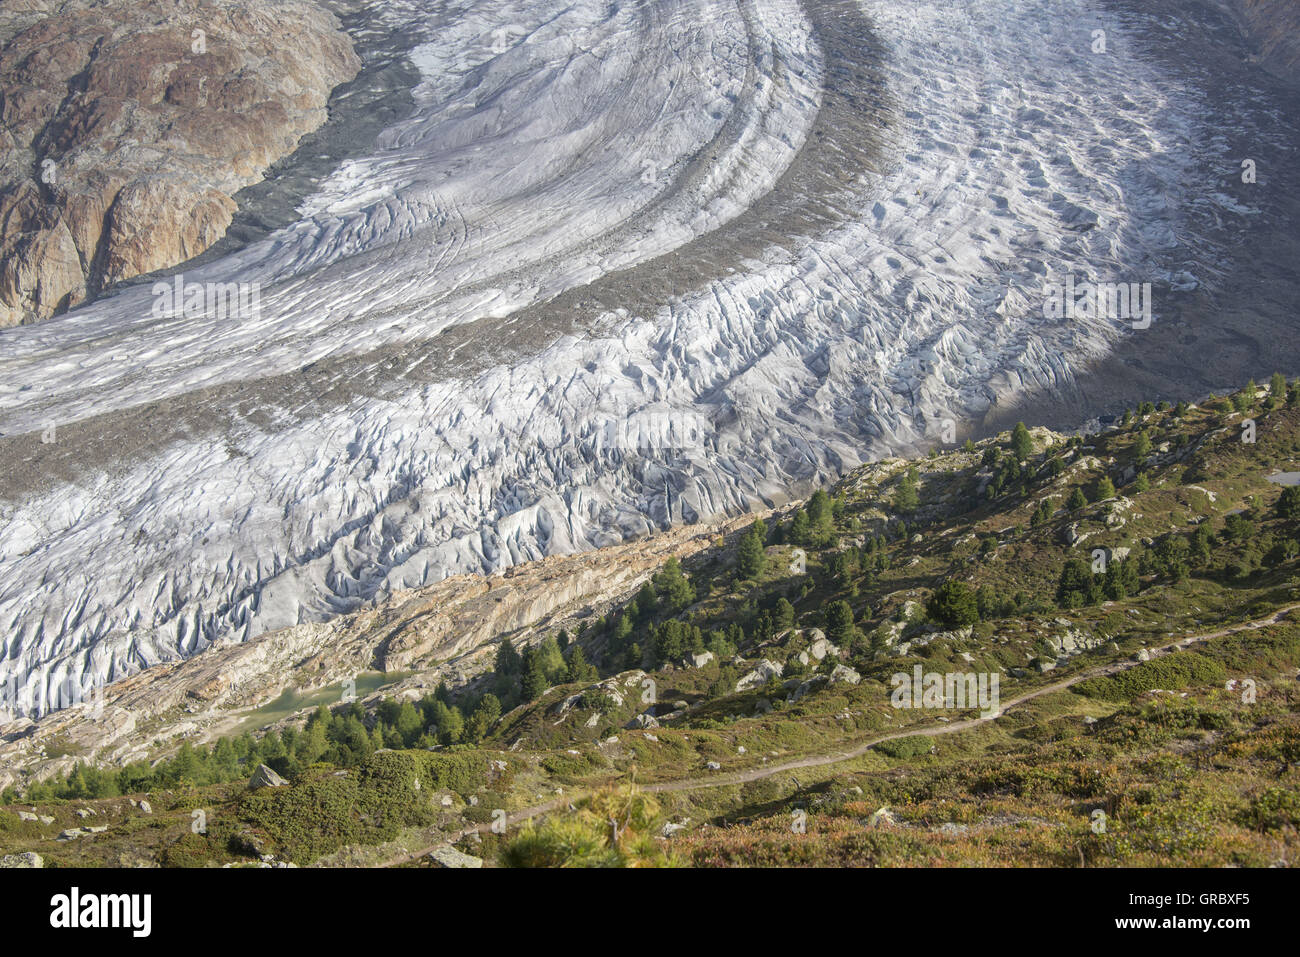 Great Aletsch Glacier With Crevasses In Summertime, Alpine Vegetation In The Foreground Stock Photo